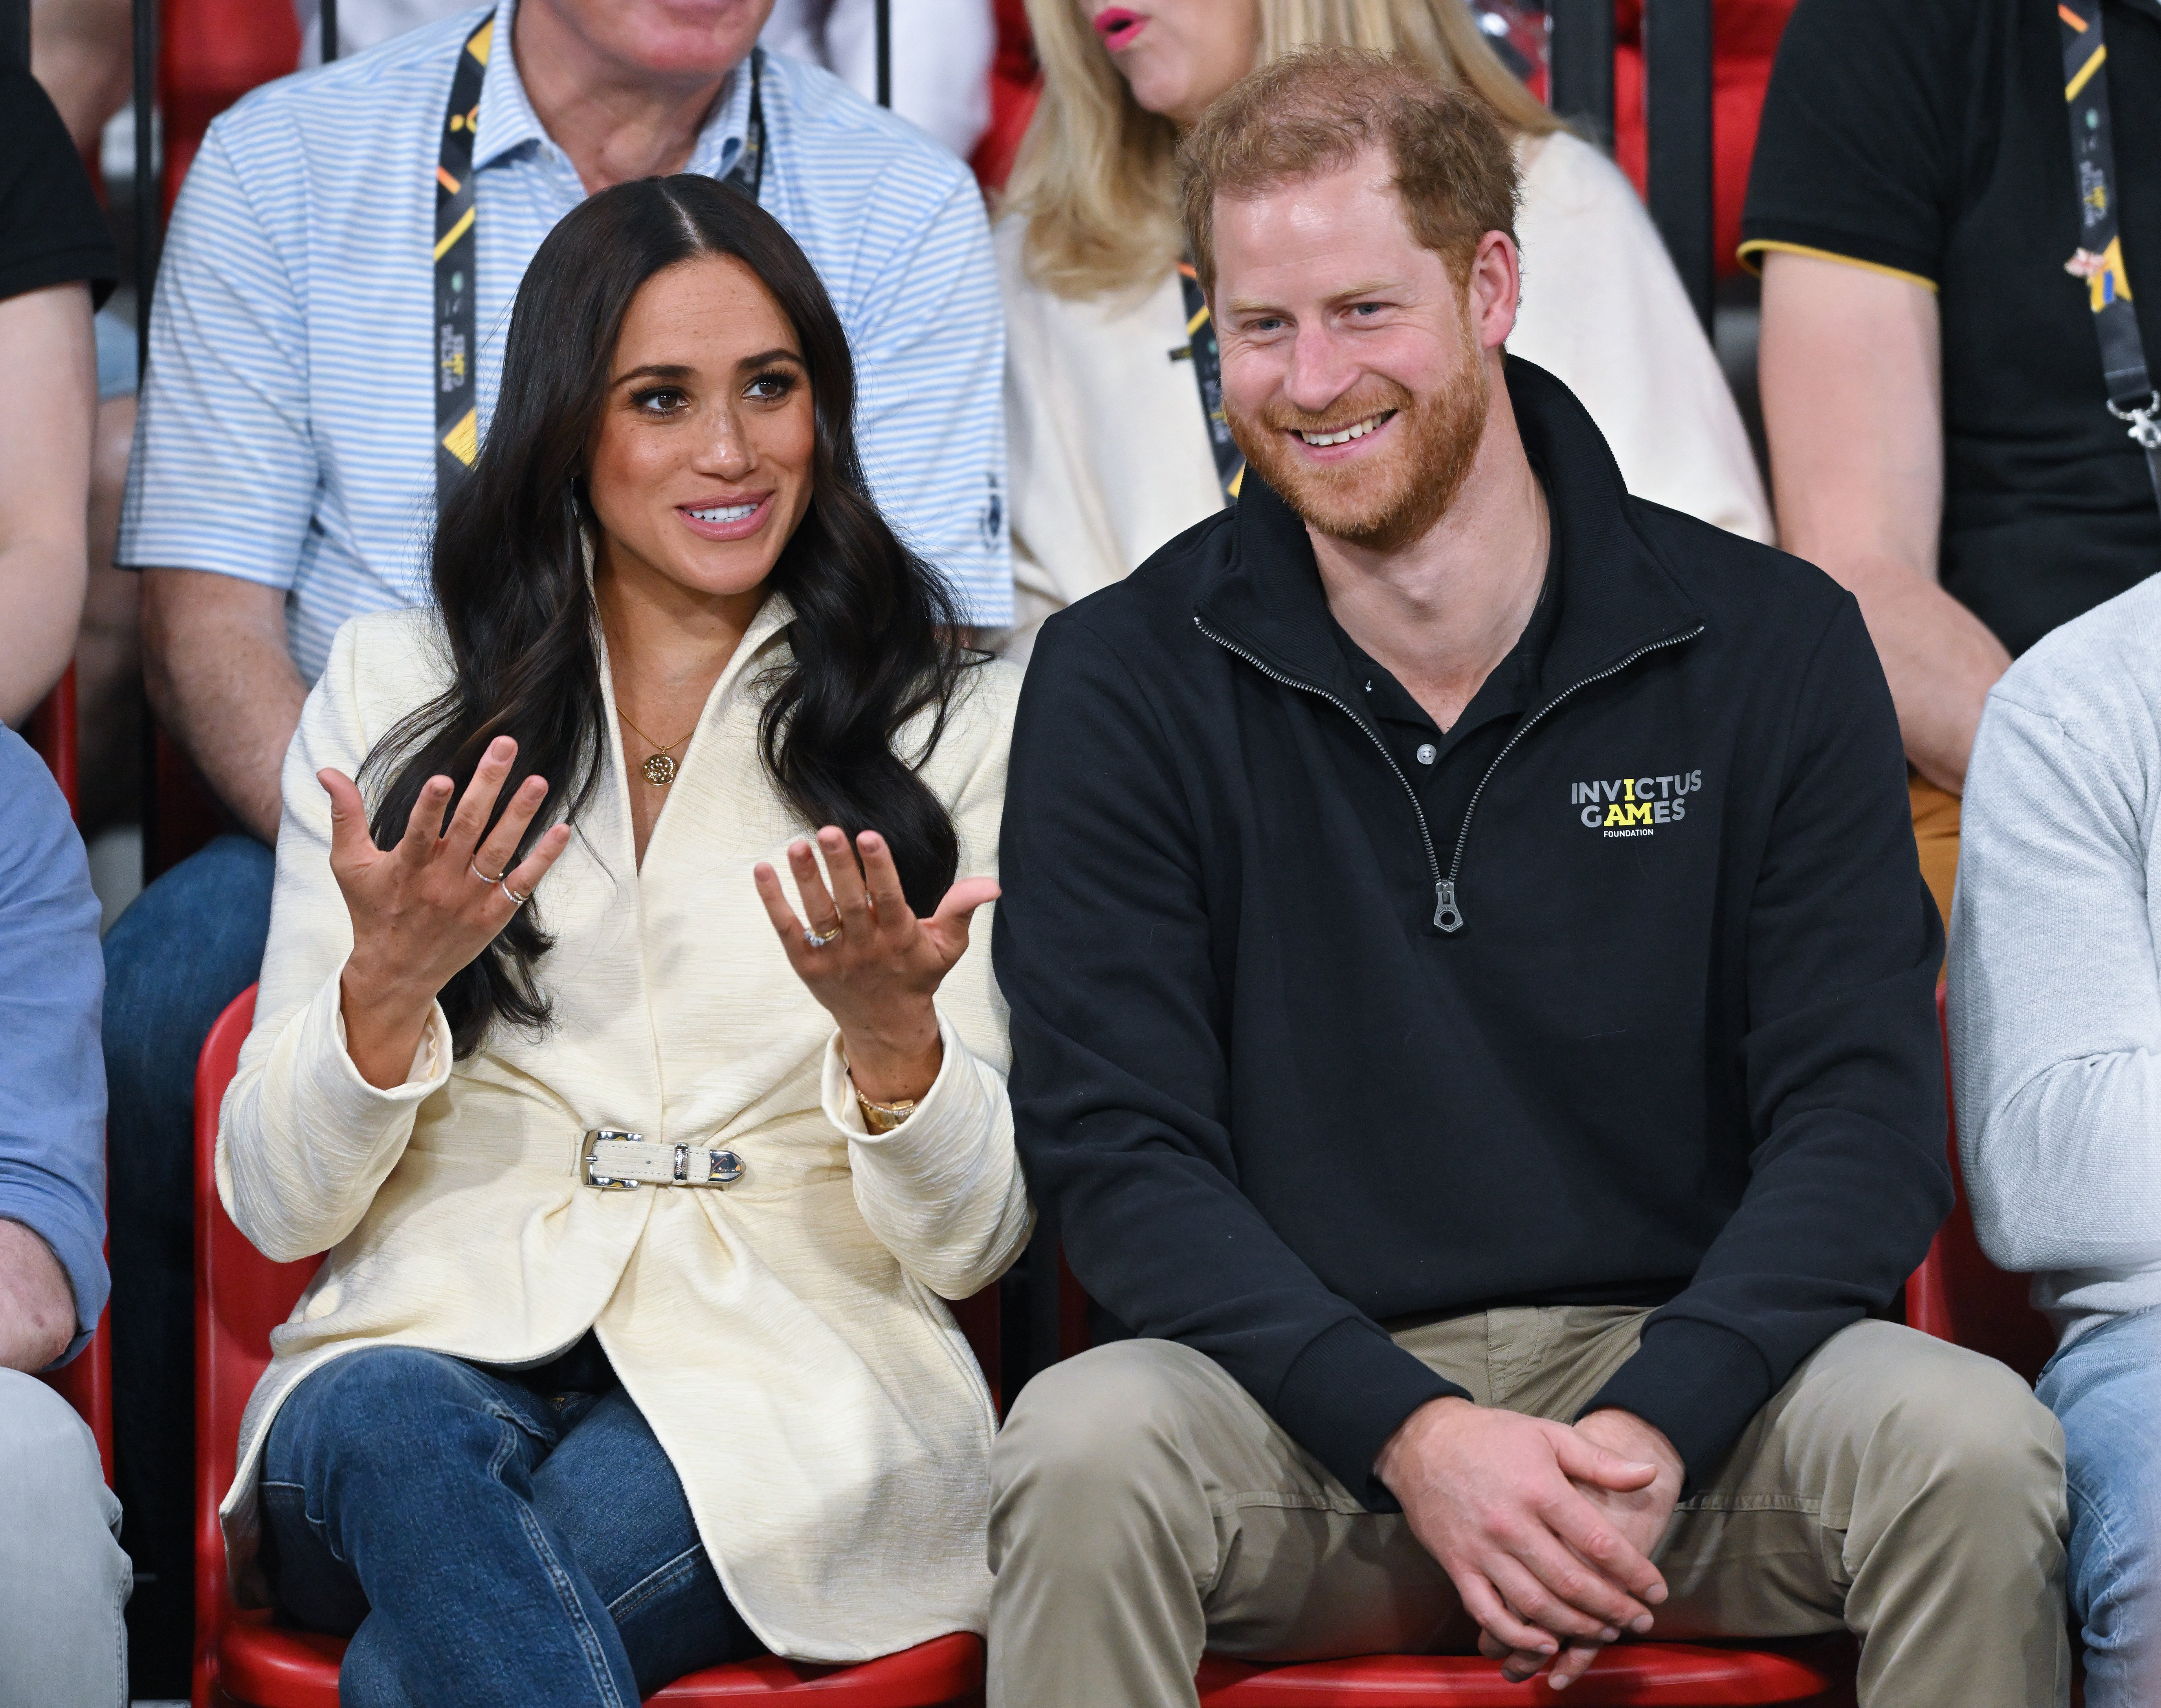 Prince Harry, Duke of Sussex, and Meghan, Duchess of Sussex, attend the sitting volleyball event during the Invictus Games at Zuiderpark on April 17, 2022, in The Hague, Netherlands. | Source: Getty Images